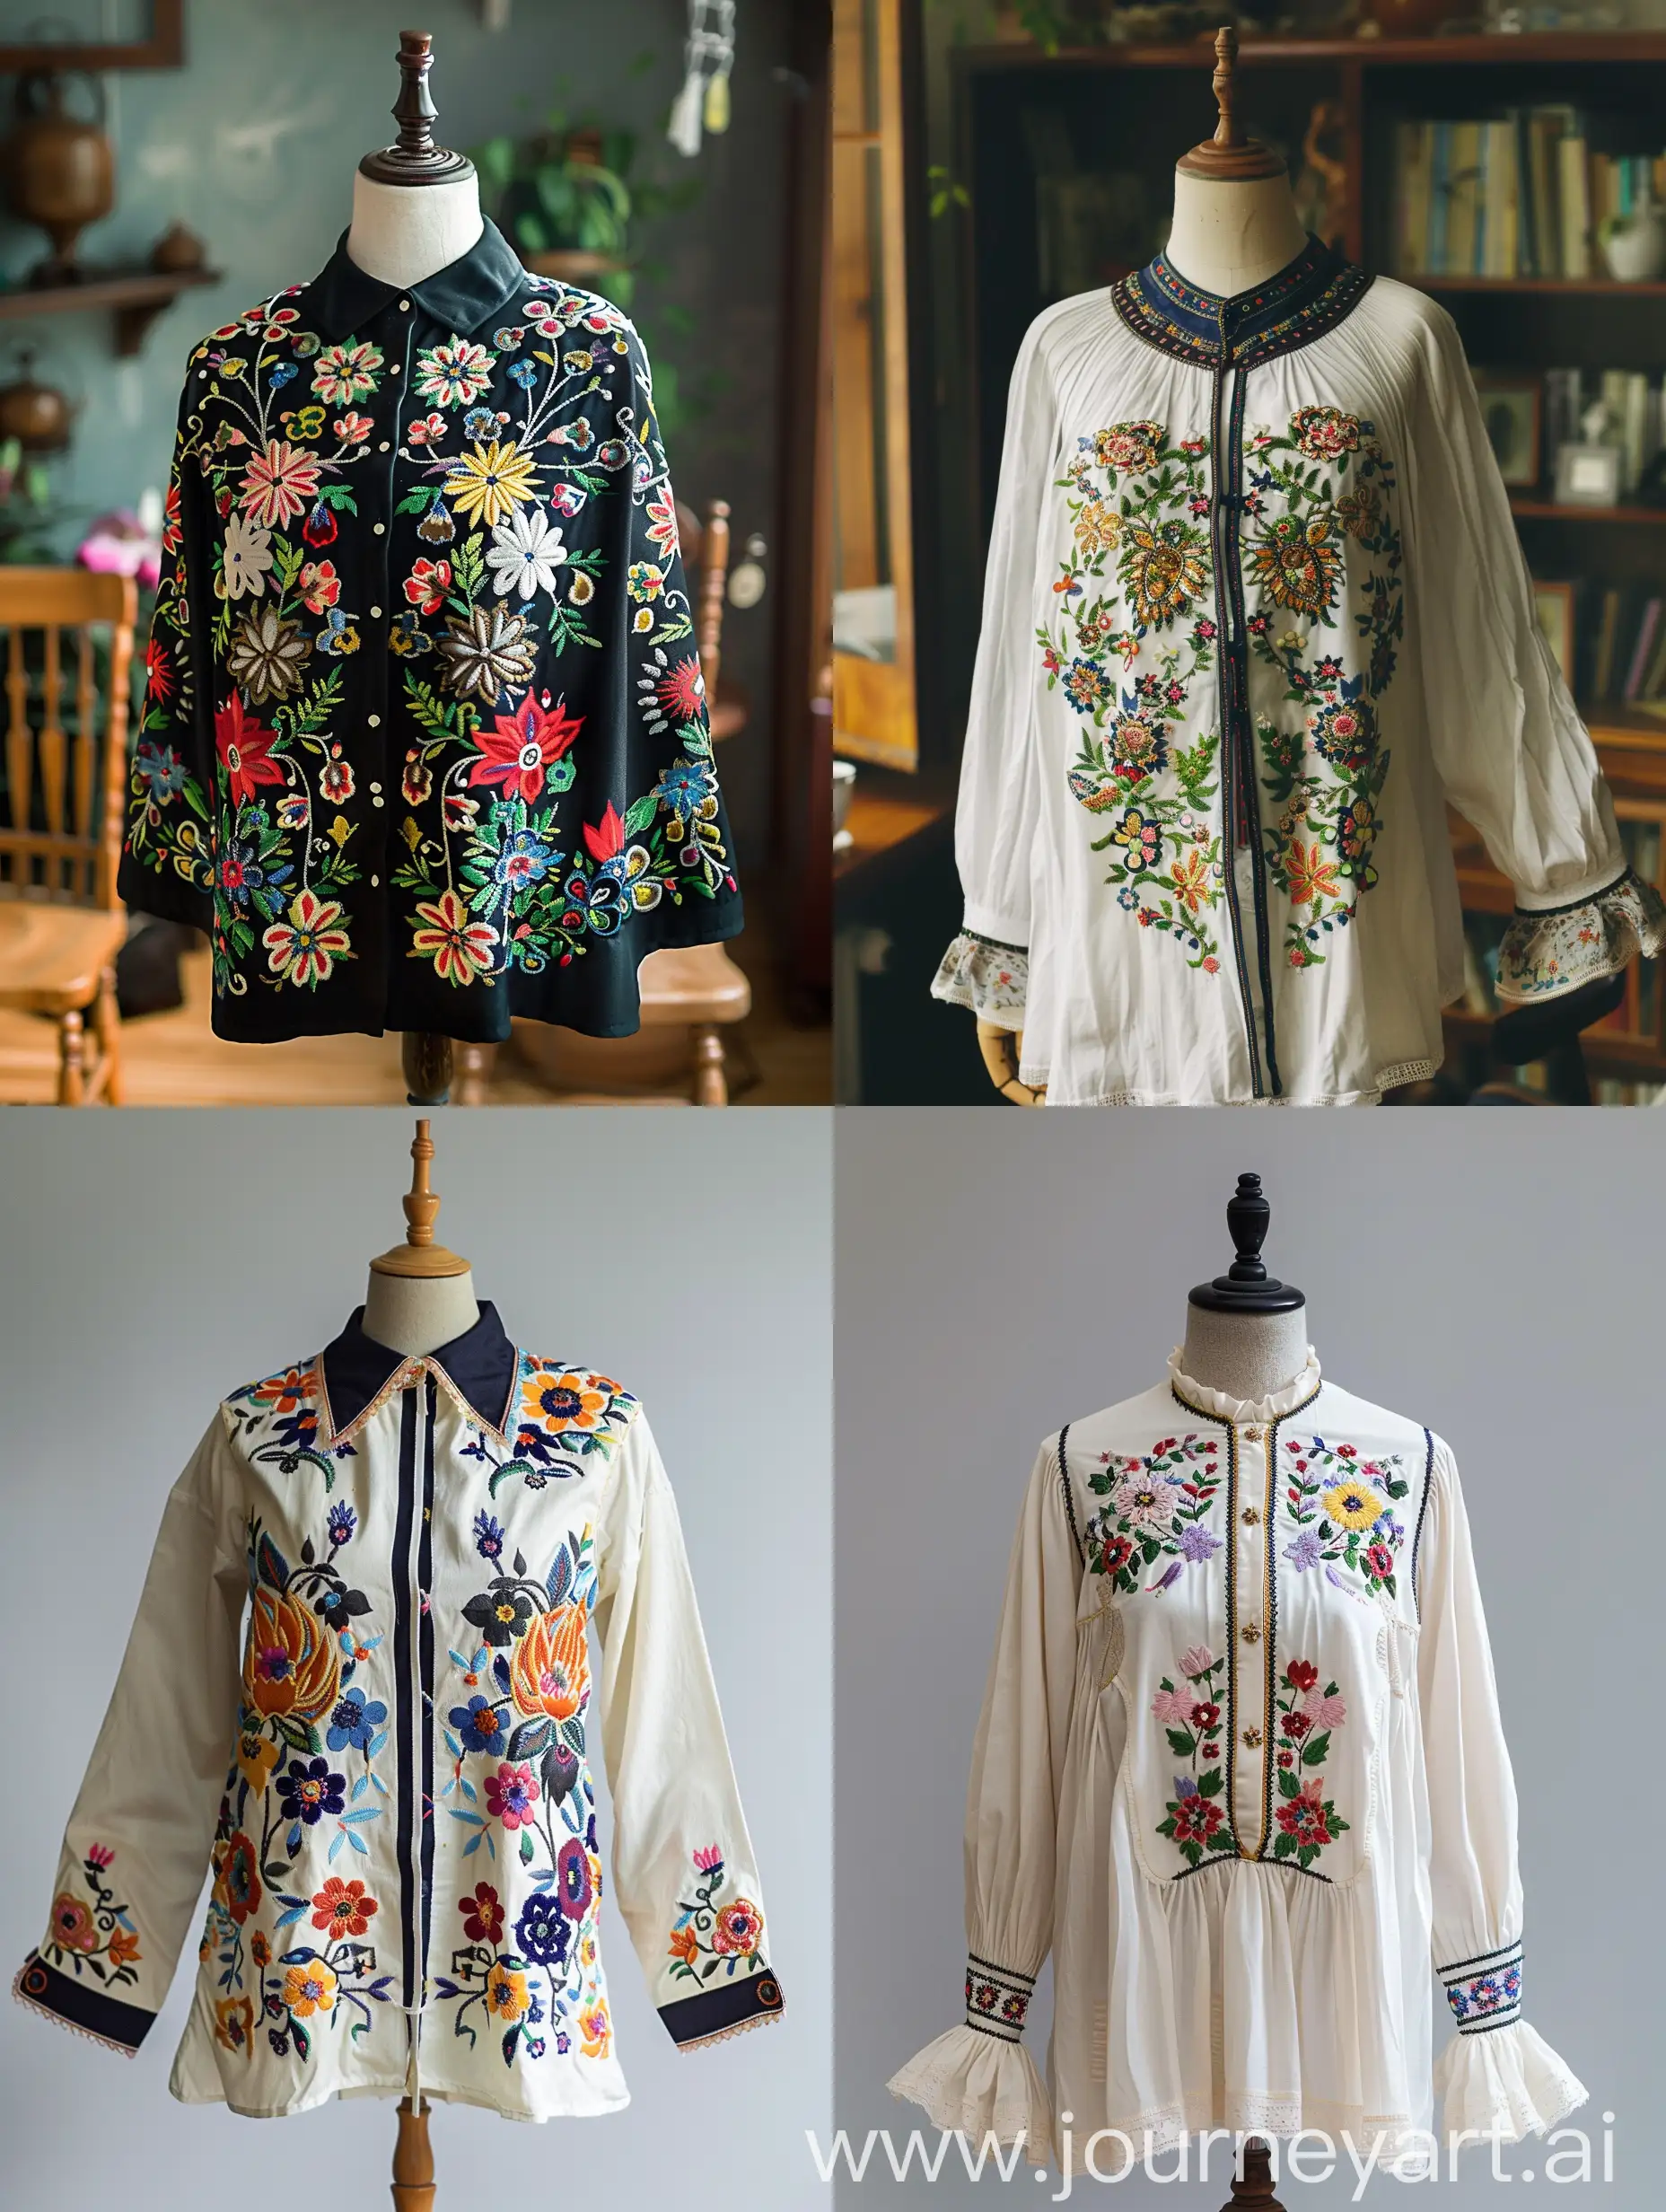 Traditional-Ukrainian-Embroidered-Shirt-Displayed-on-Mannequin